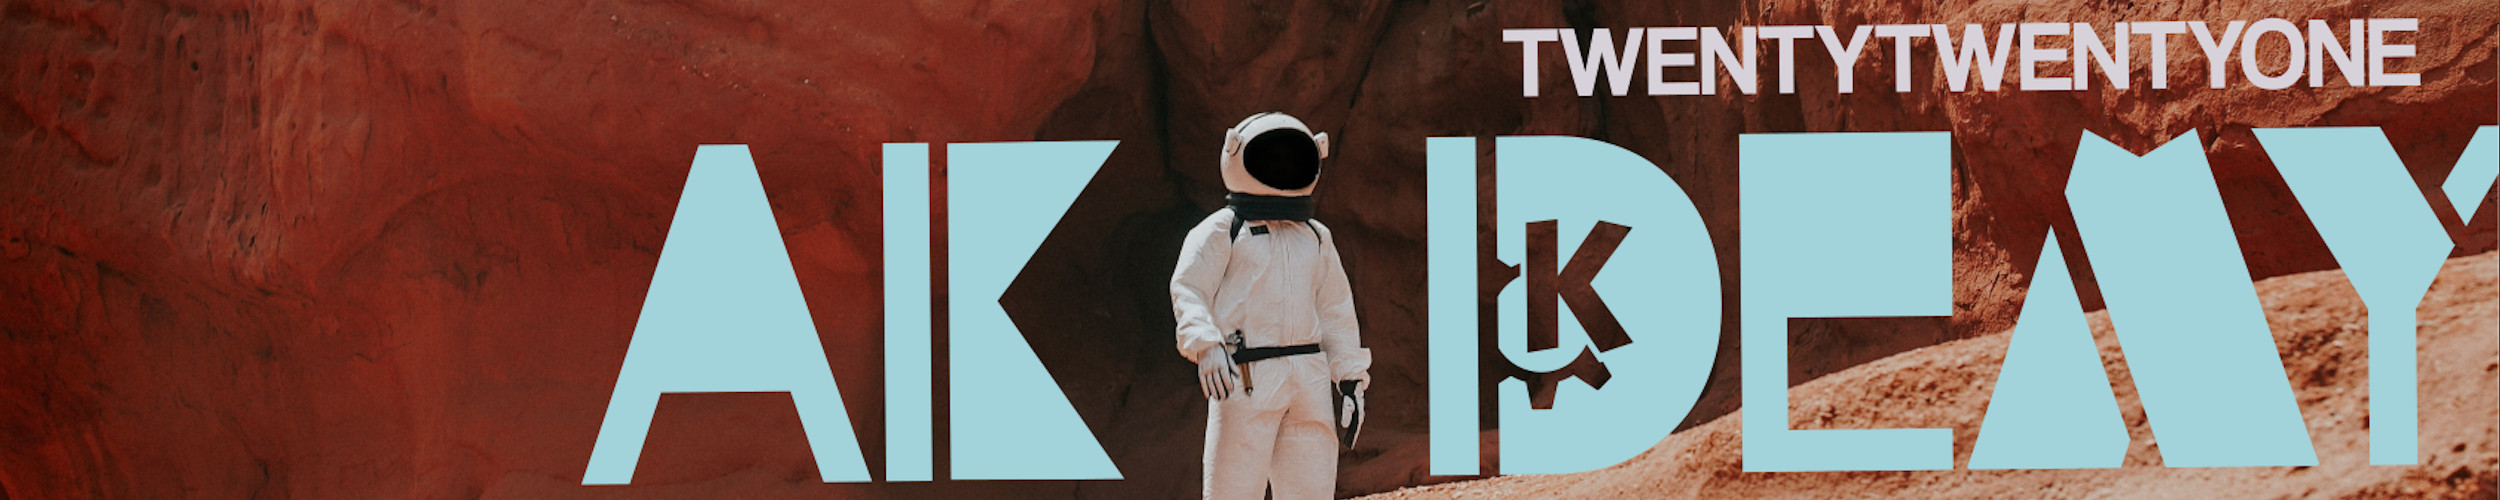 Image with an astronaut on Mars and the words &quot;AKADEMY
TWENTYONE&quot;